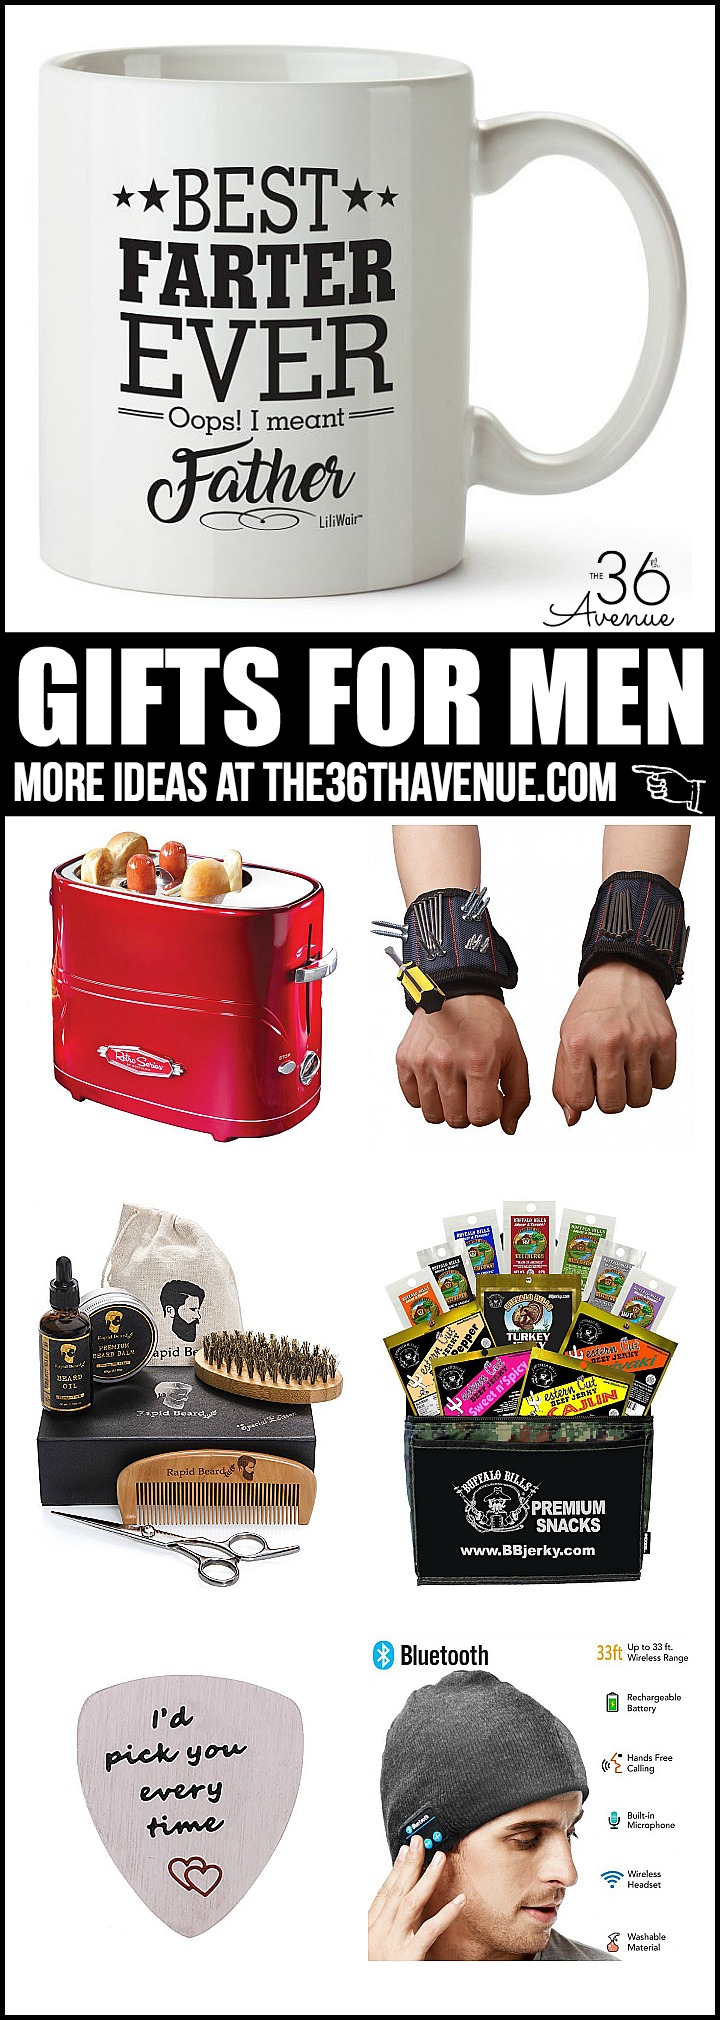 The Ultimate Holiday Gift Guide for Men | Best Holiday Gifts for Men